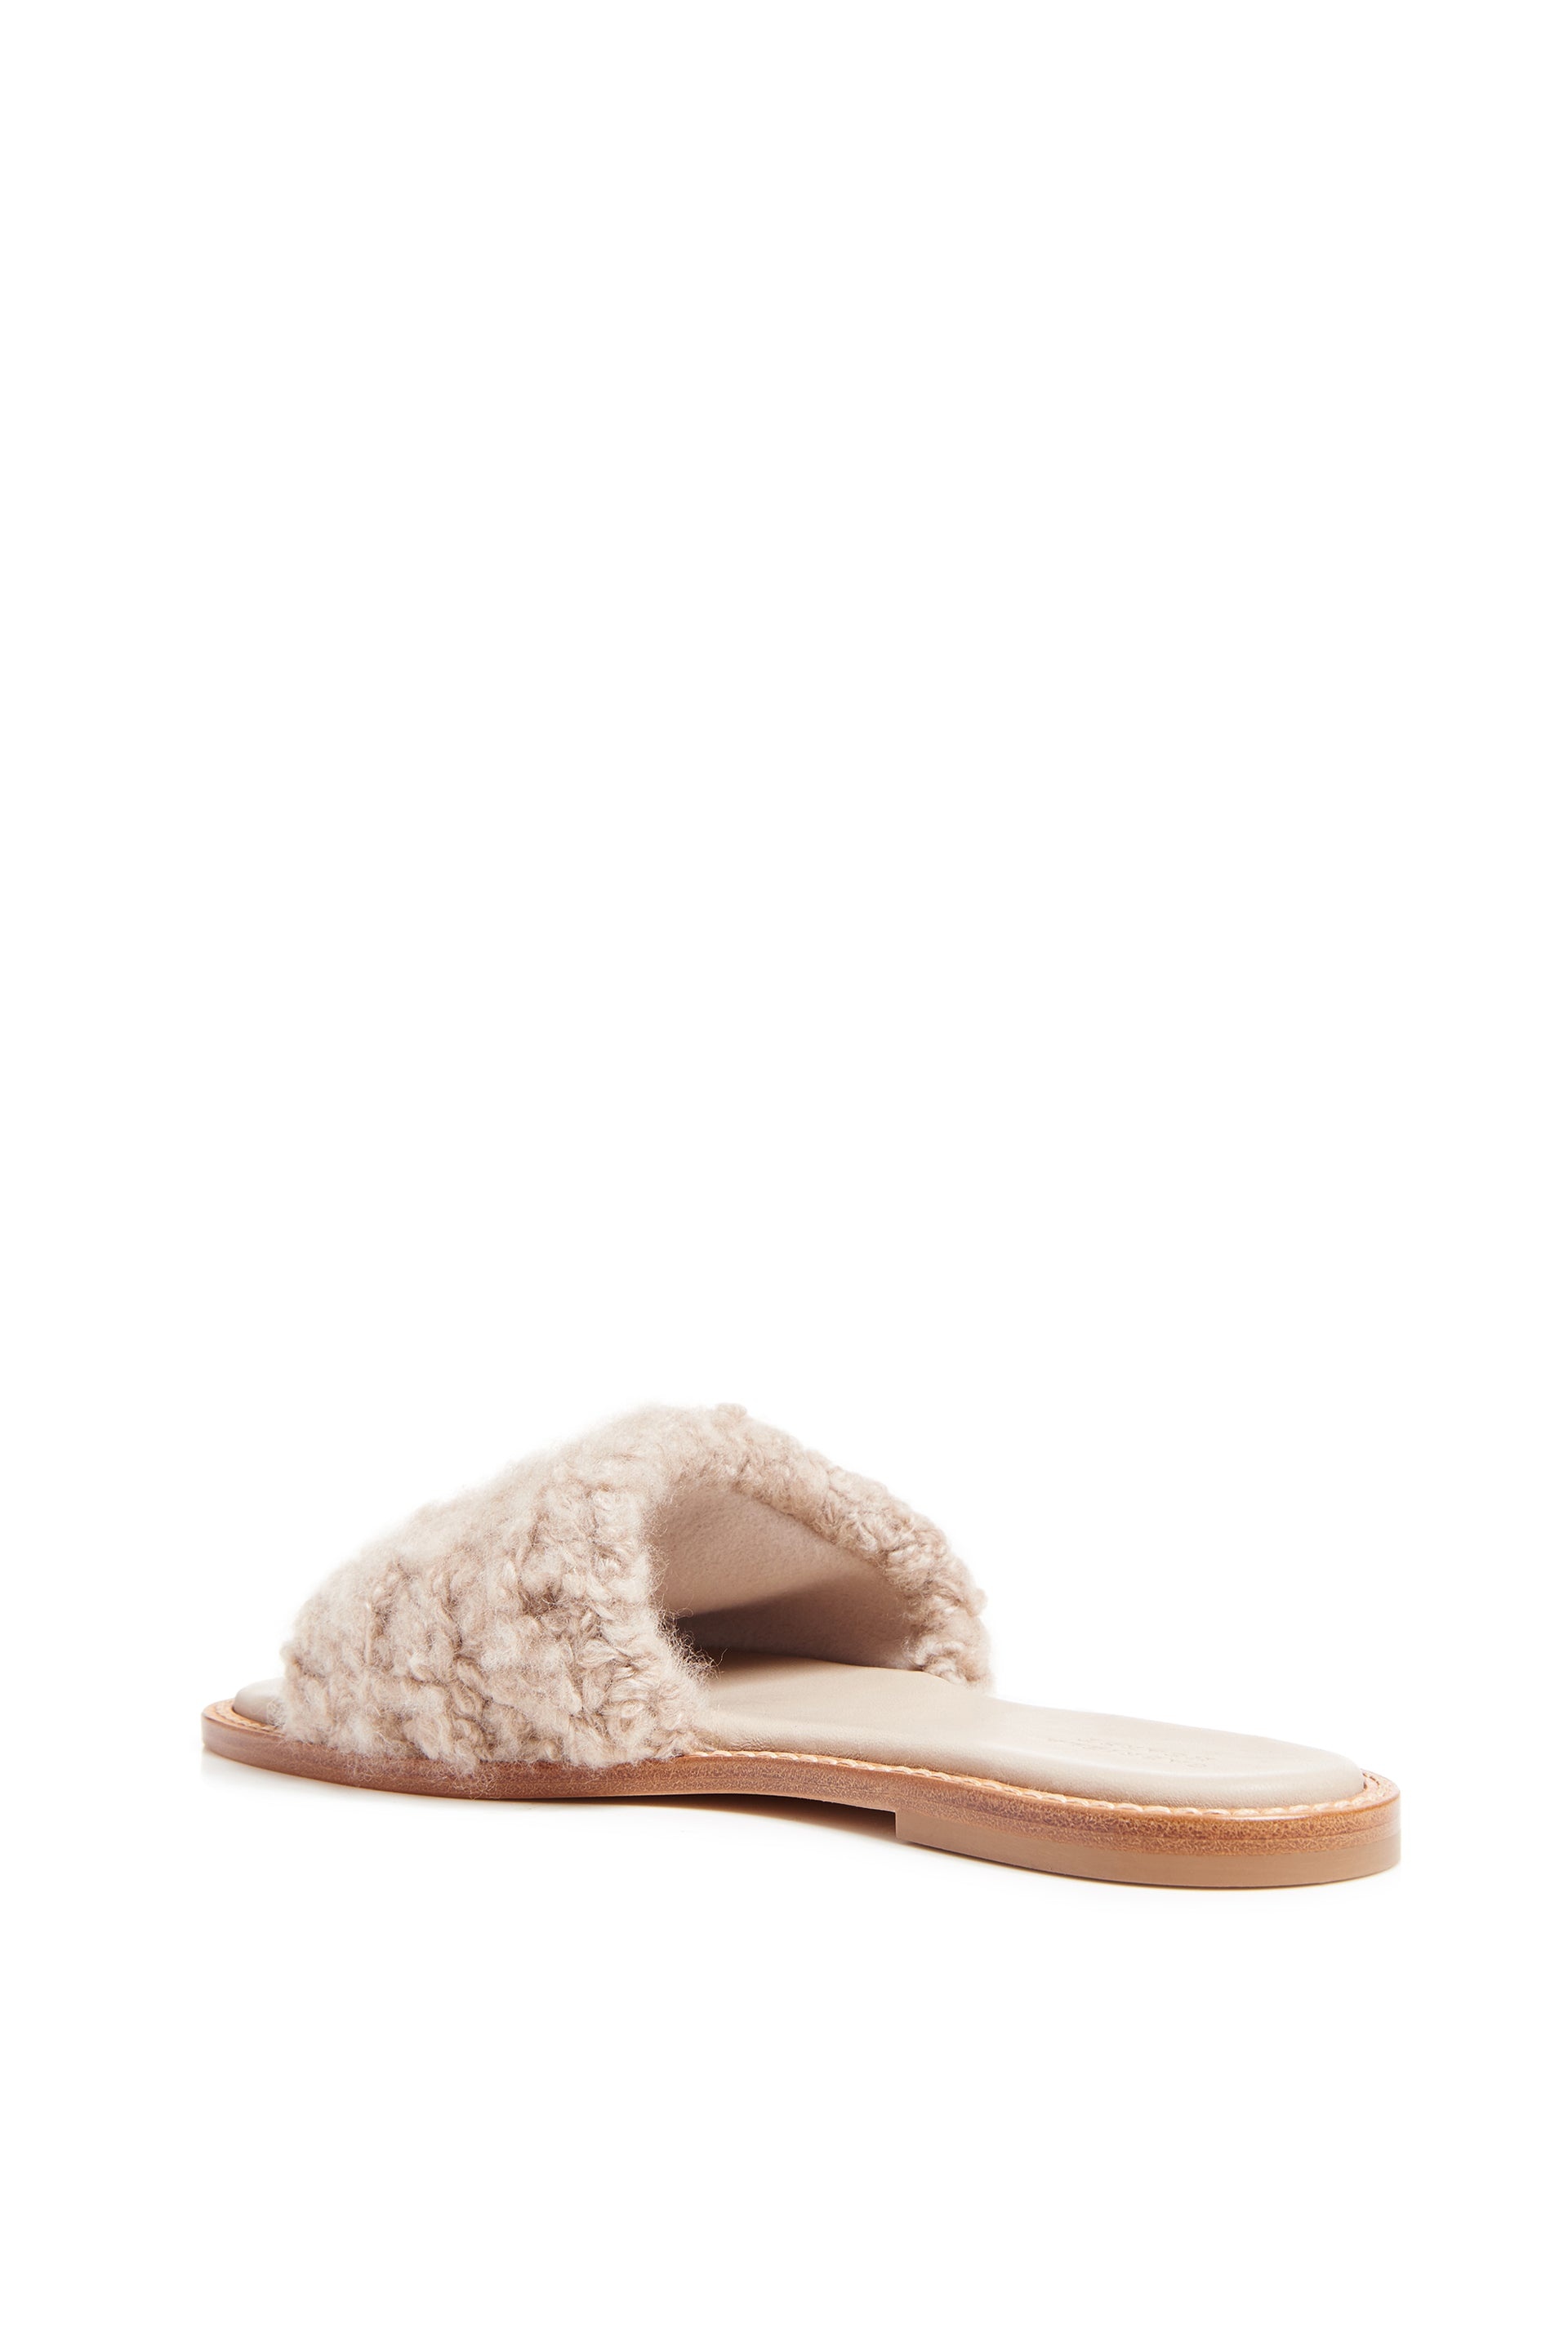 Ballast Slide in Oatmeal Leather & Cashmere - 3